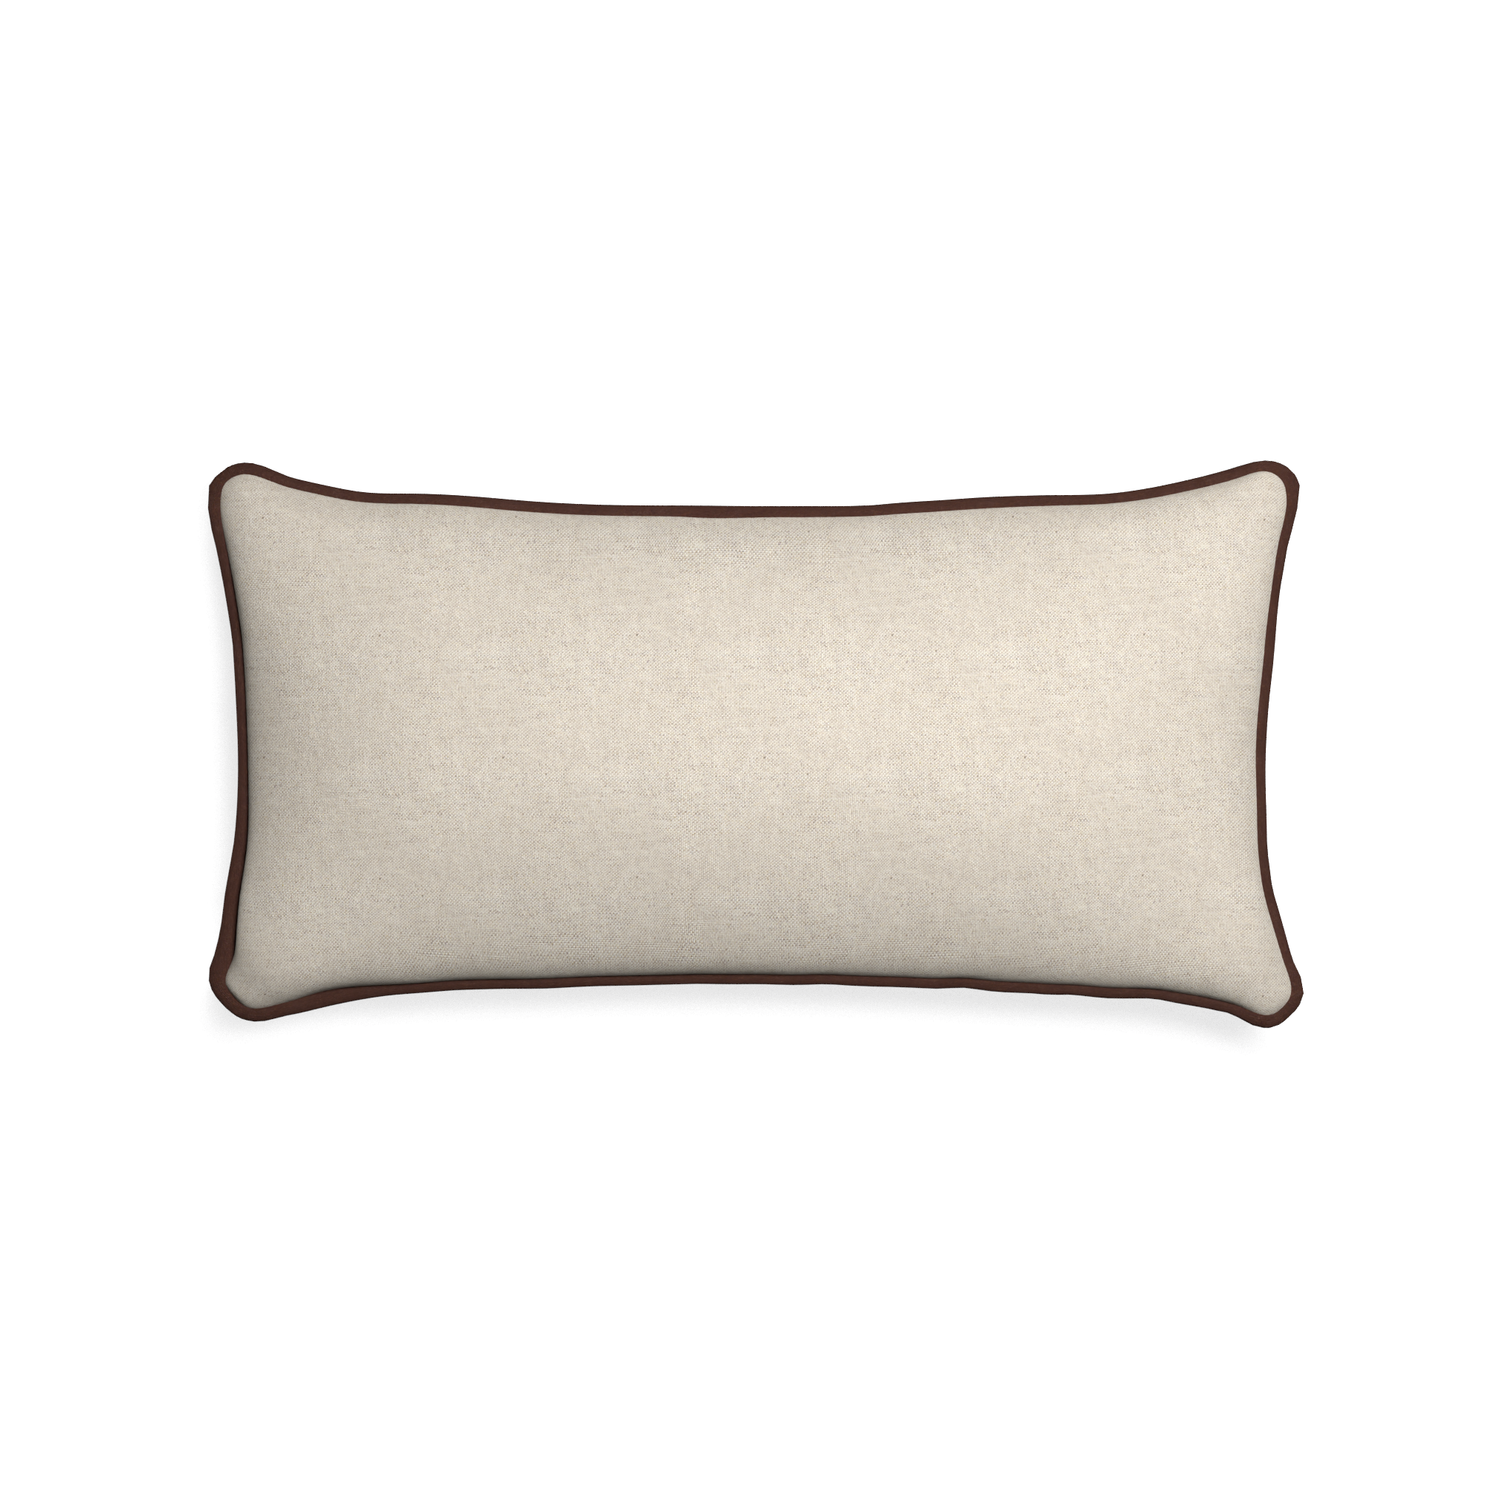 Midi-lumbar oat custom light brownpillow with w piping on white background